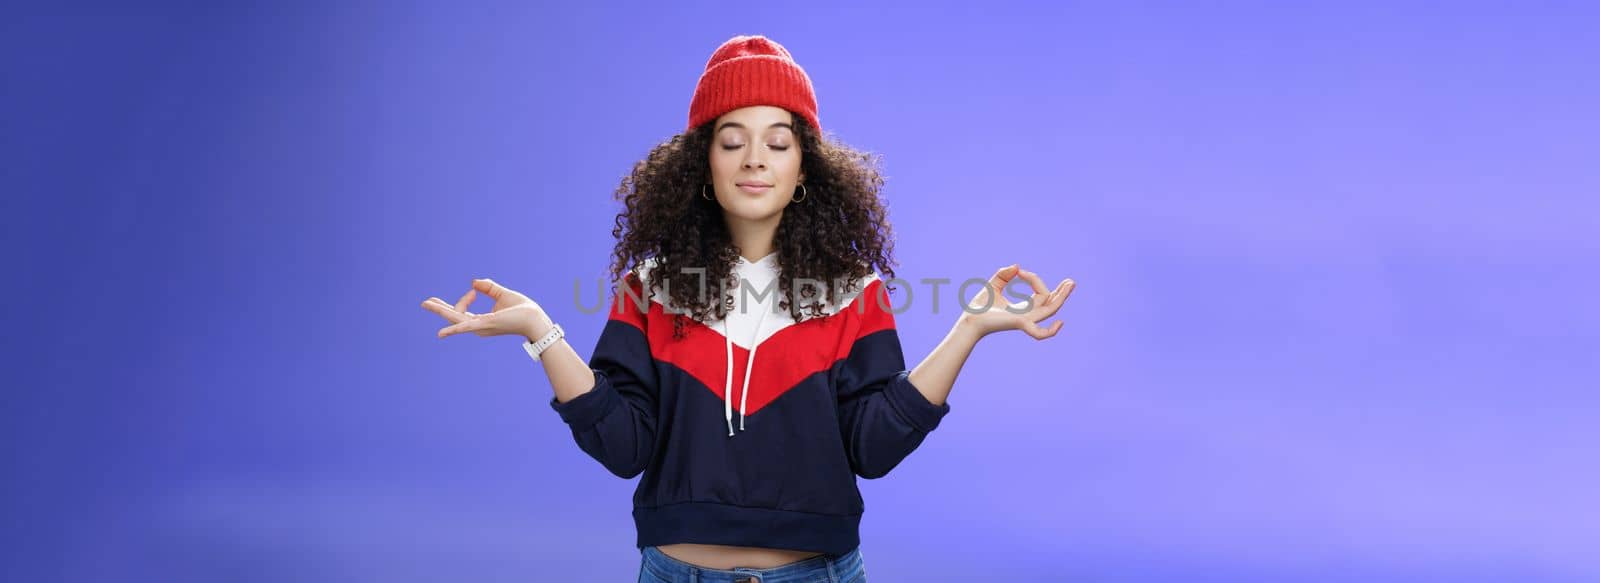 Waist-up shot of girl reaching nirvana feeling peaceful and calm holding hands sideways with mudra gesture close eyes, meditating releasing stress standing calm in lotus pose over blue background.